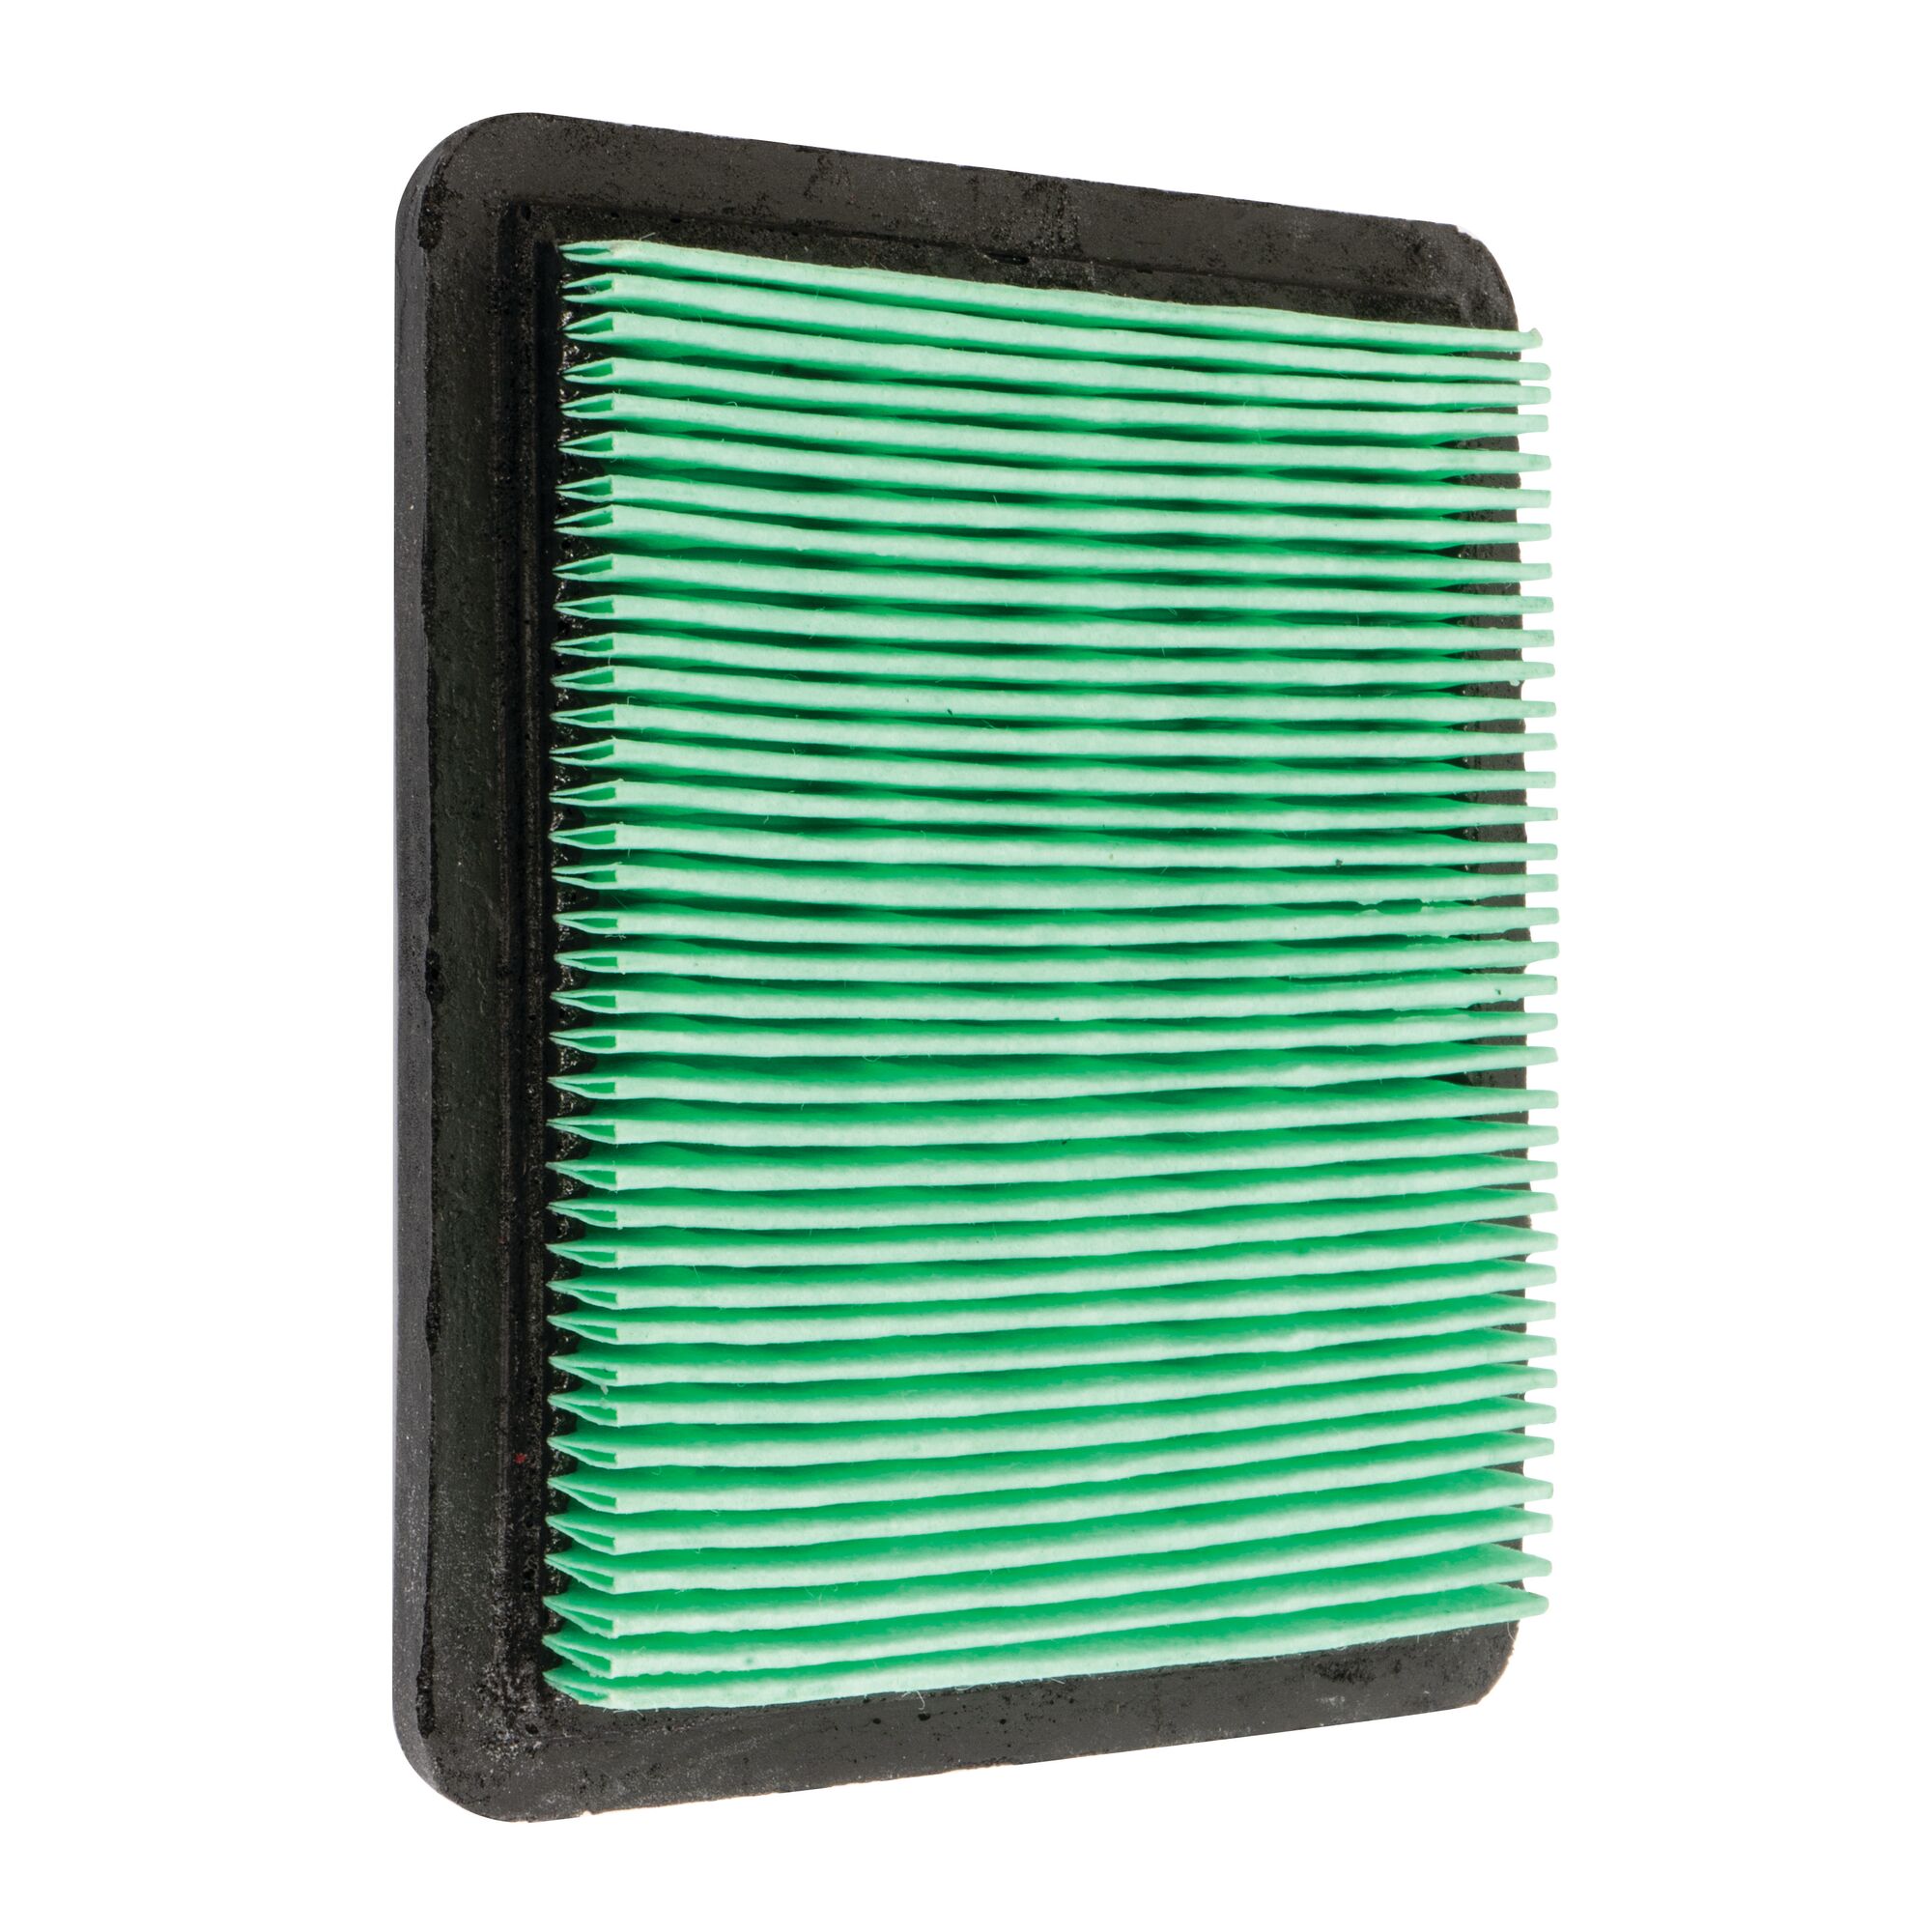 Left profile of Air Filter 117211-ZL8-023.